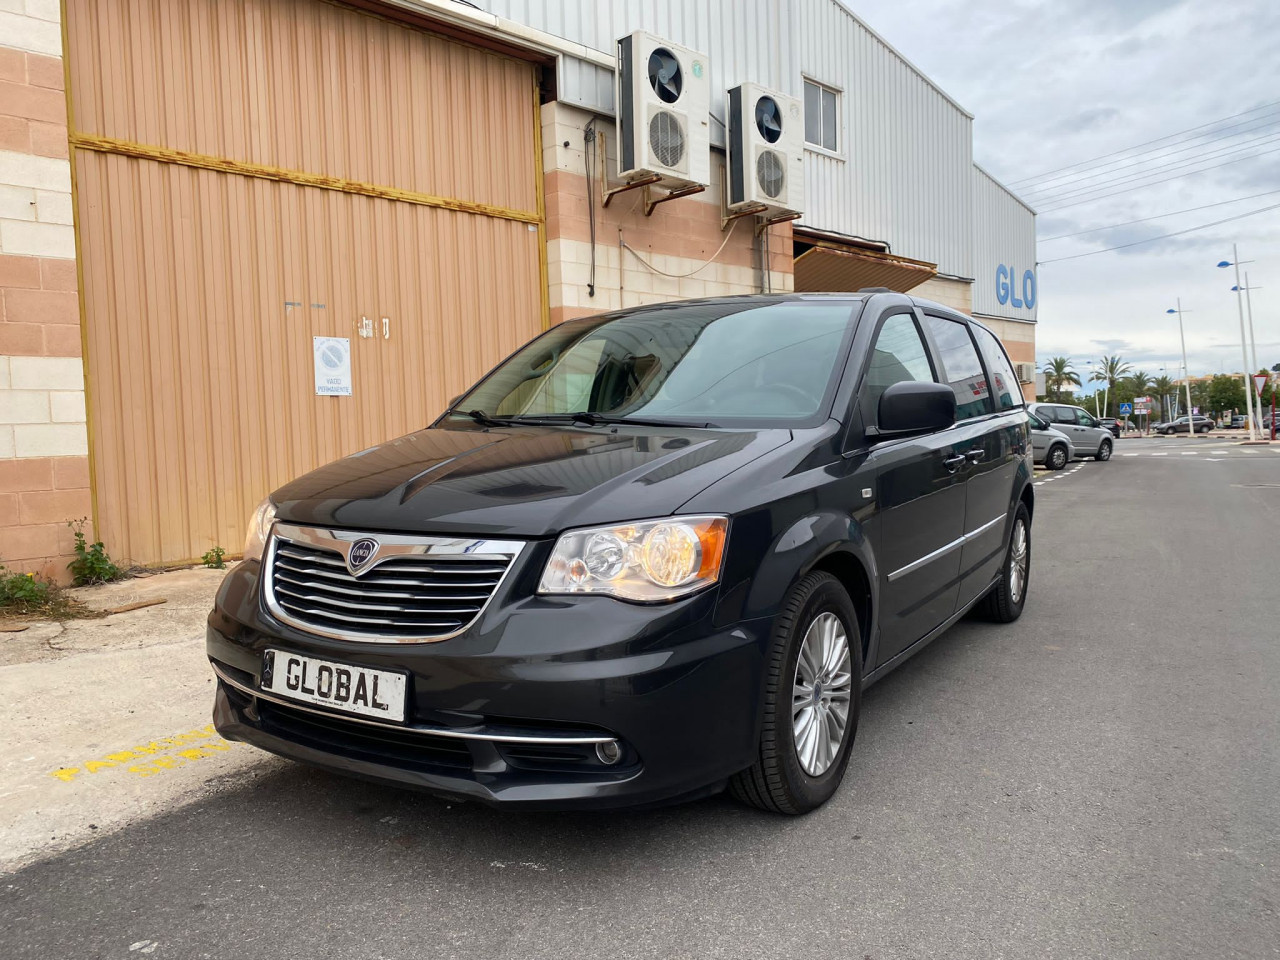 Lancia Grand Voyager 2.8 Crdi Gold Automatic People carrier